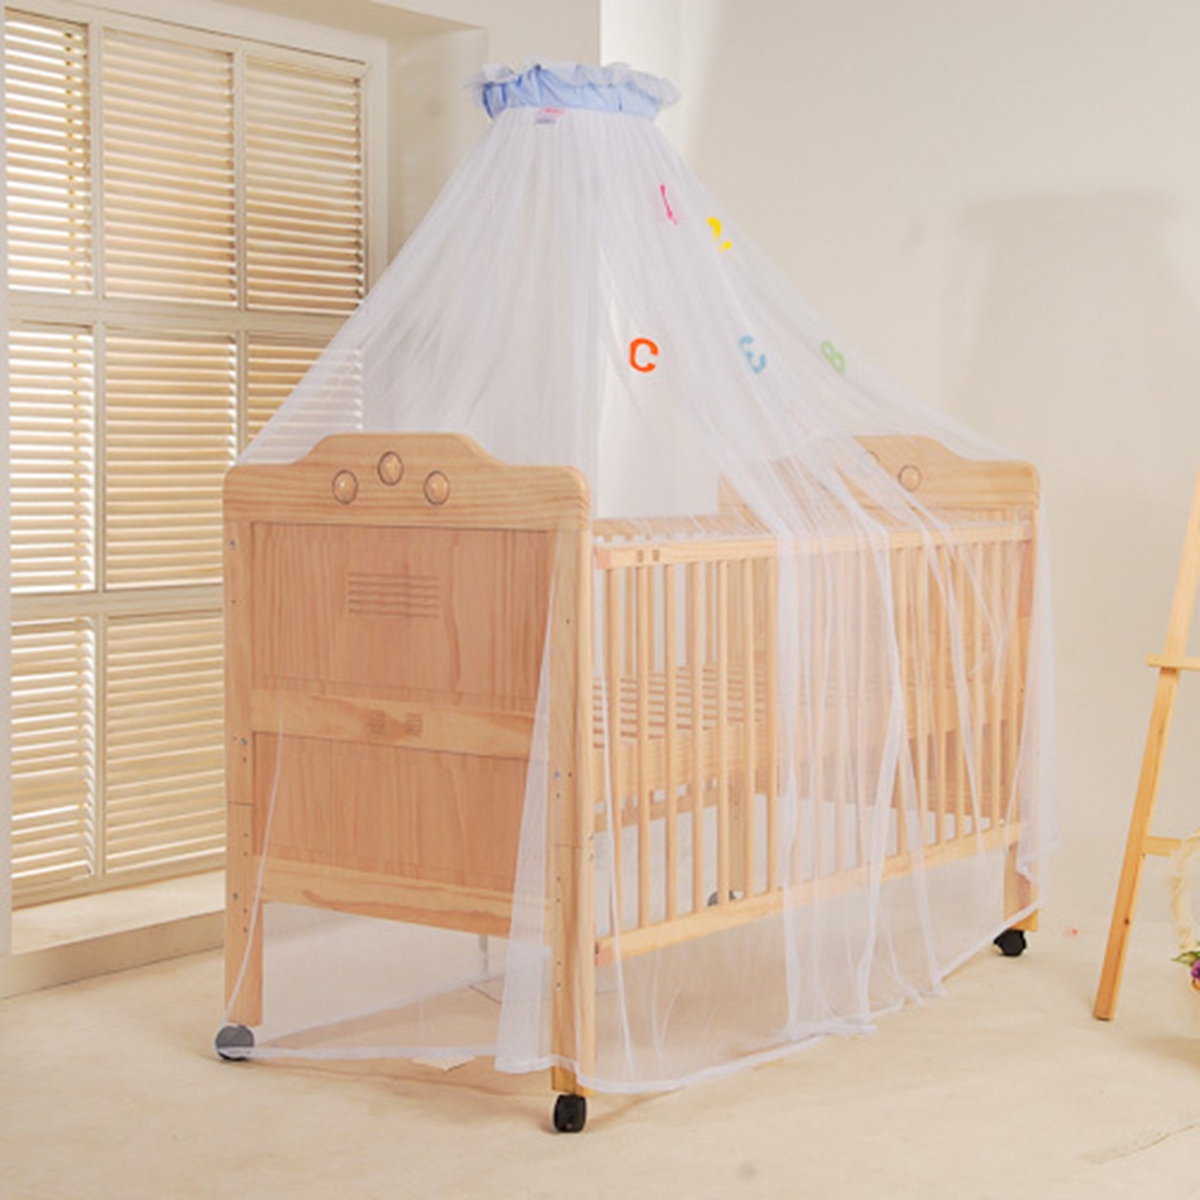 Mosquito-Net-Children-Bed-Curtain-Dome-Cot-Netting-Drape-Stand-Insect-Protection-1818006-2